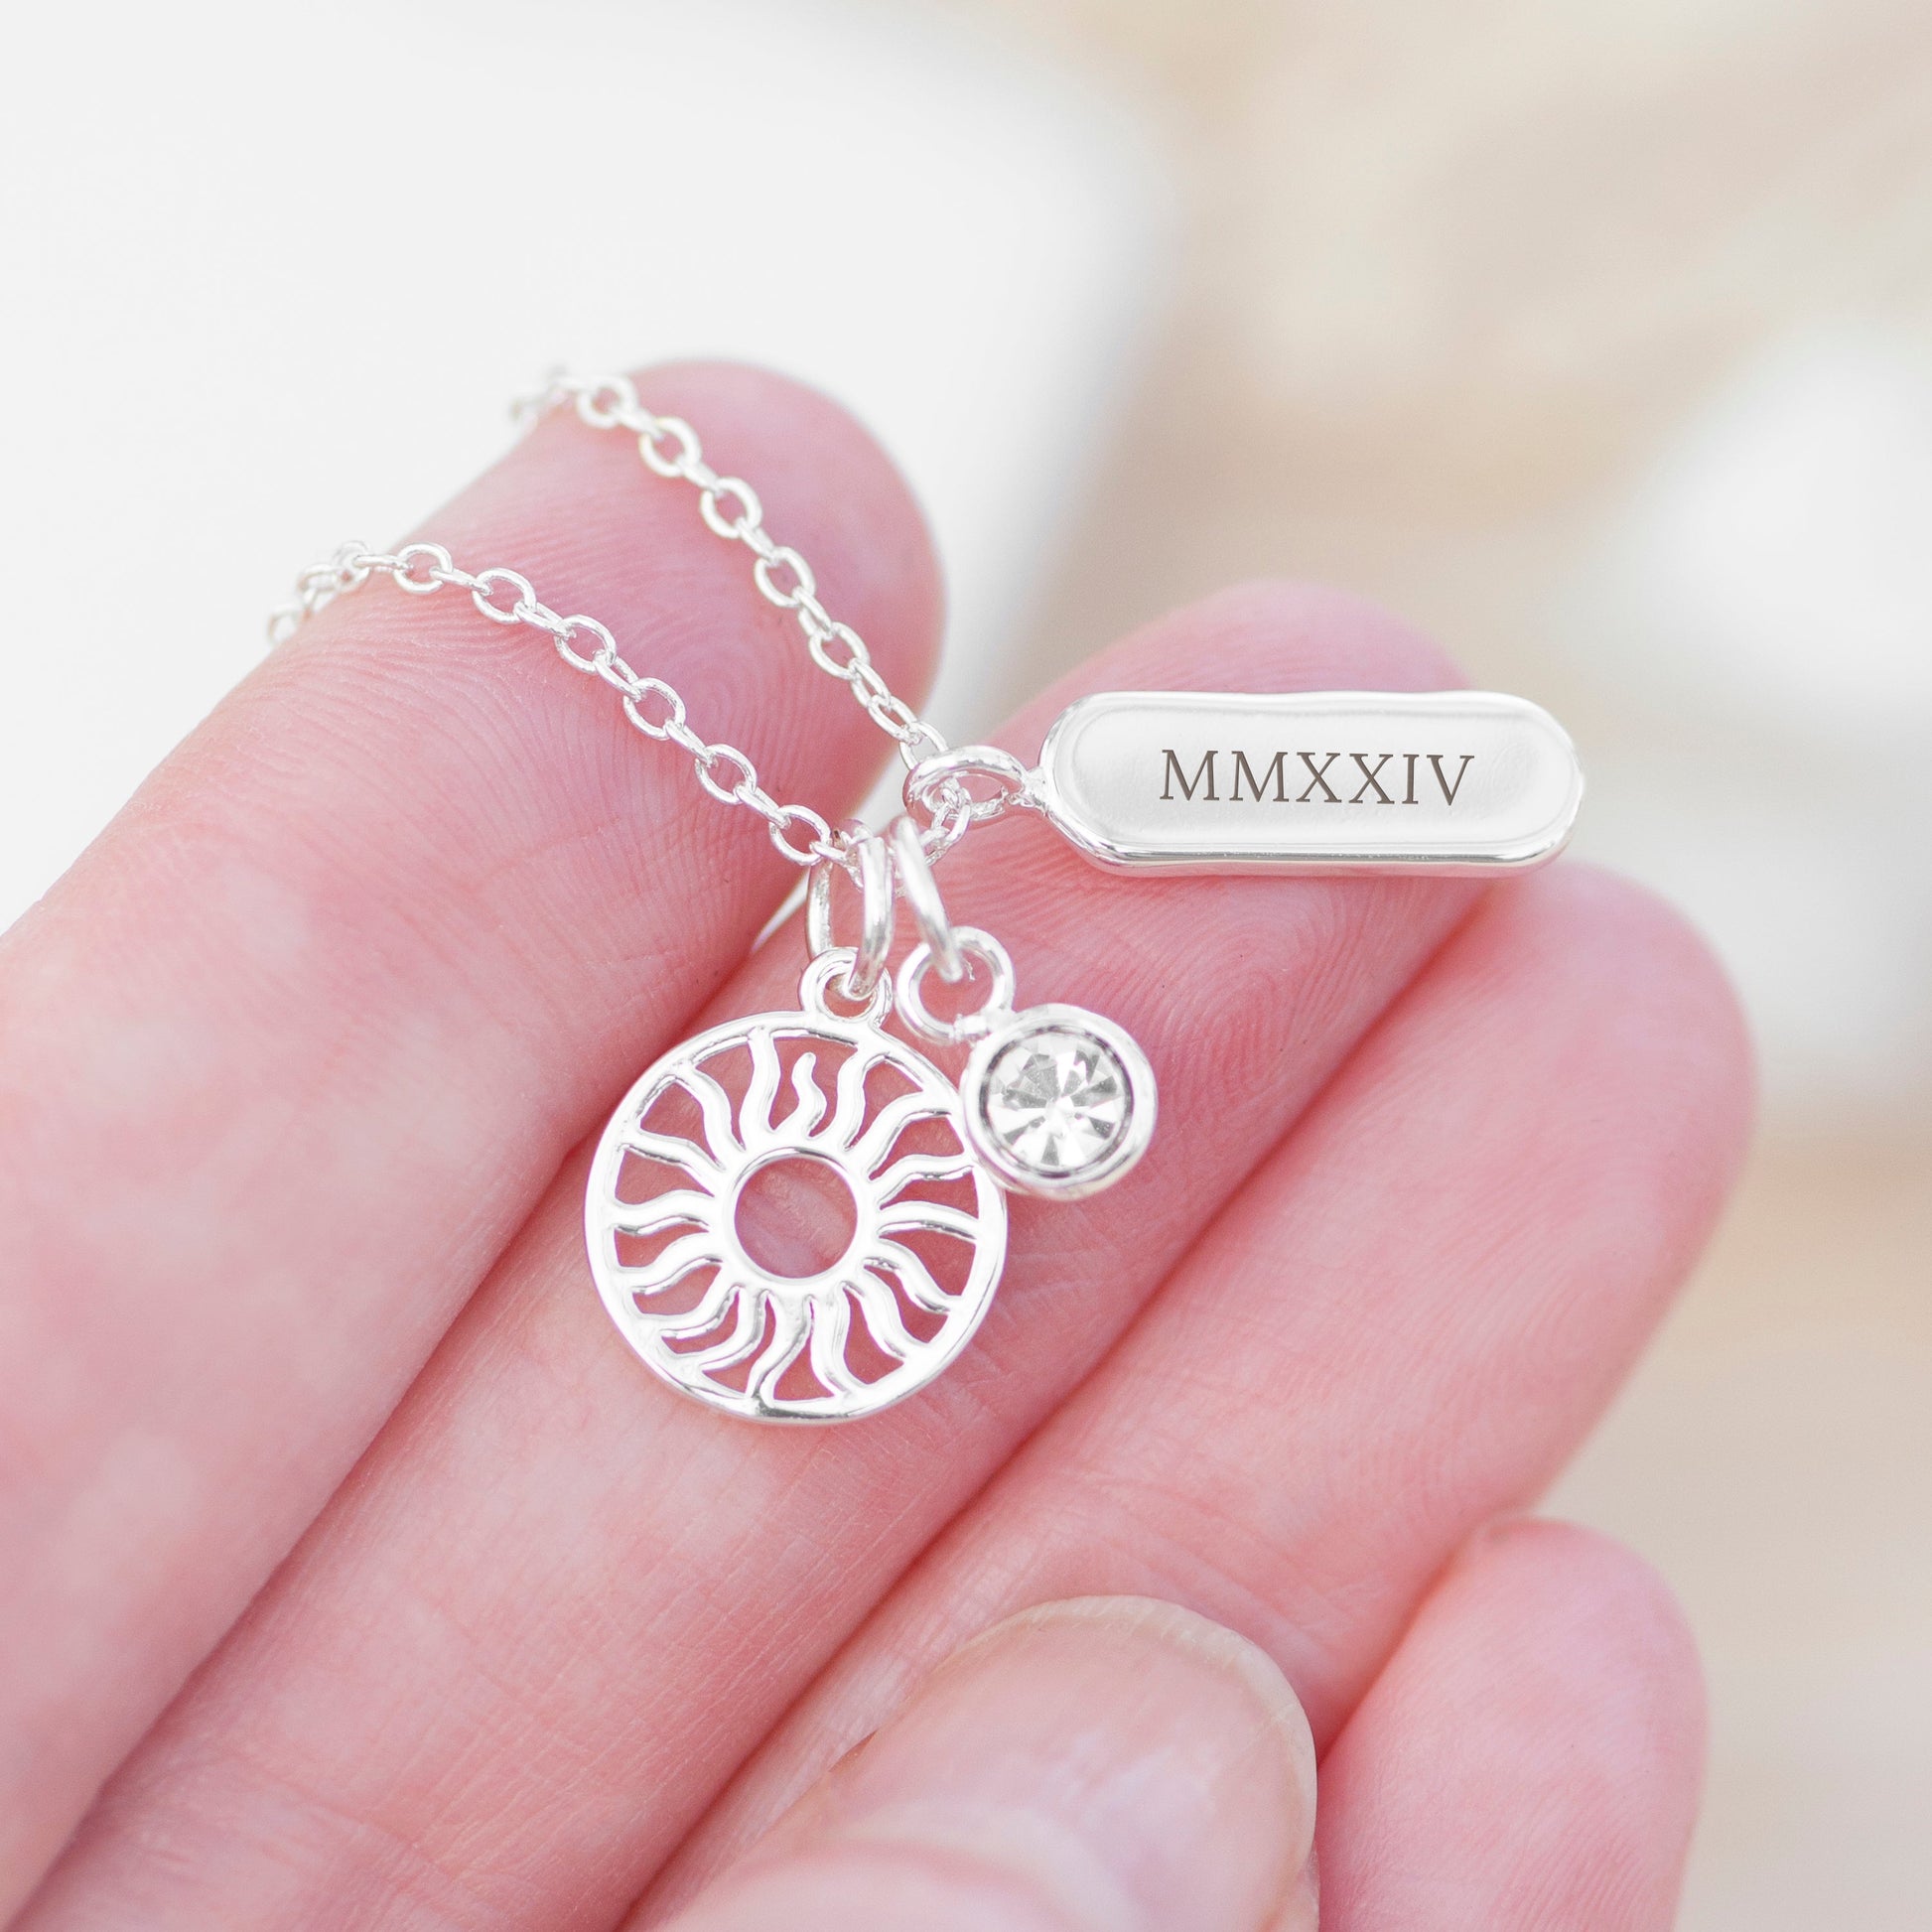 Personalized Necklaces - Personalized Eternal Sun Charms Necklace 